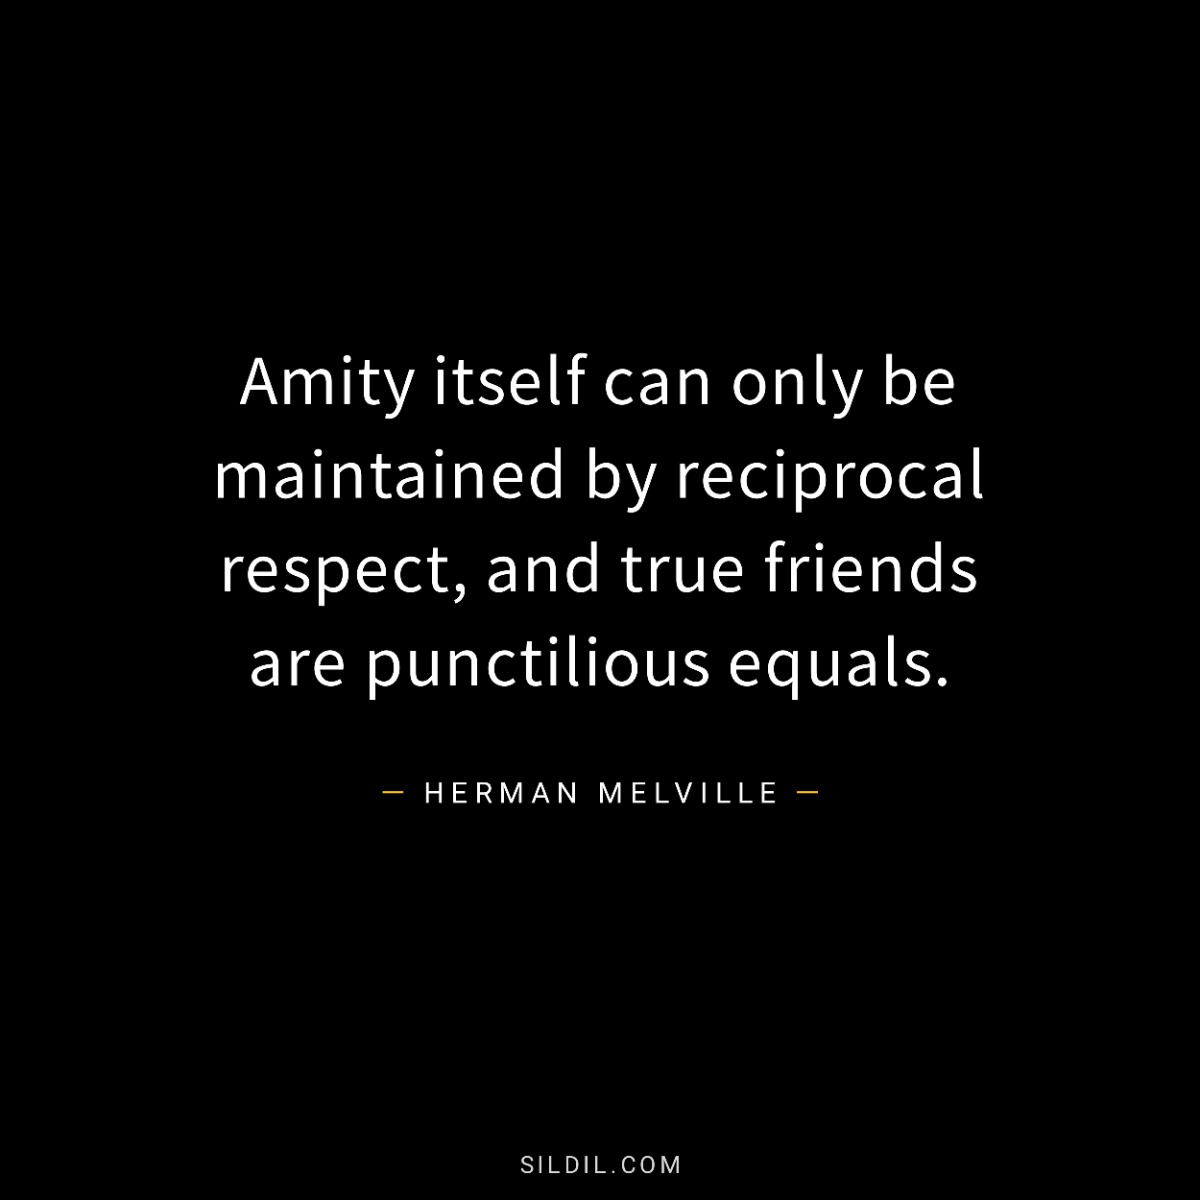 Amity itself can only be maintained by reciprocal respect, and true friends are punctilious equals.